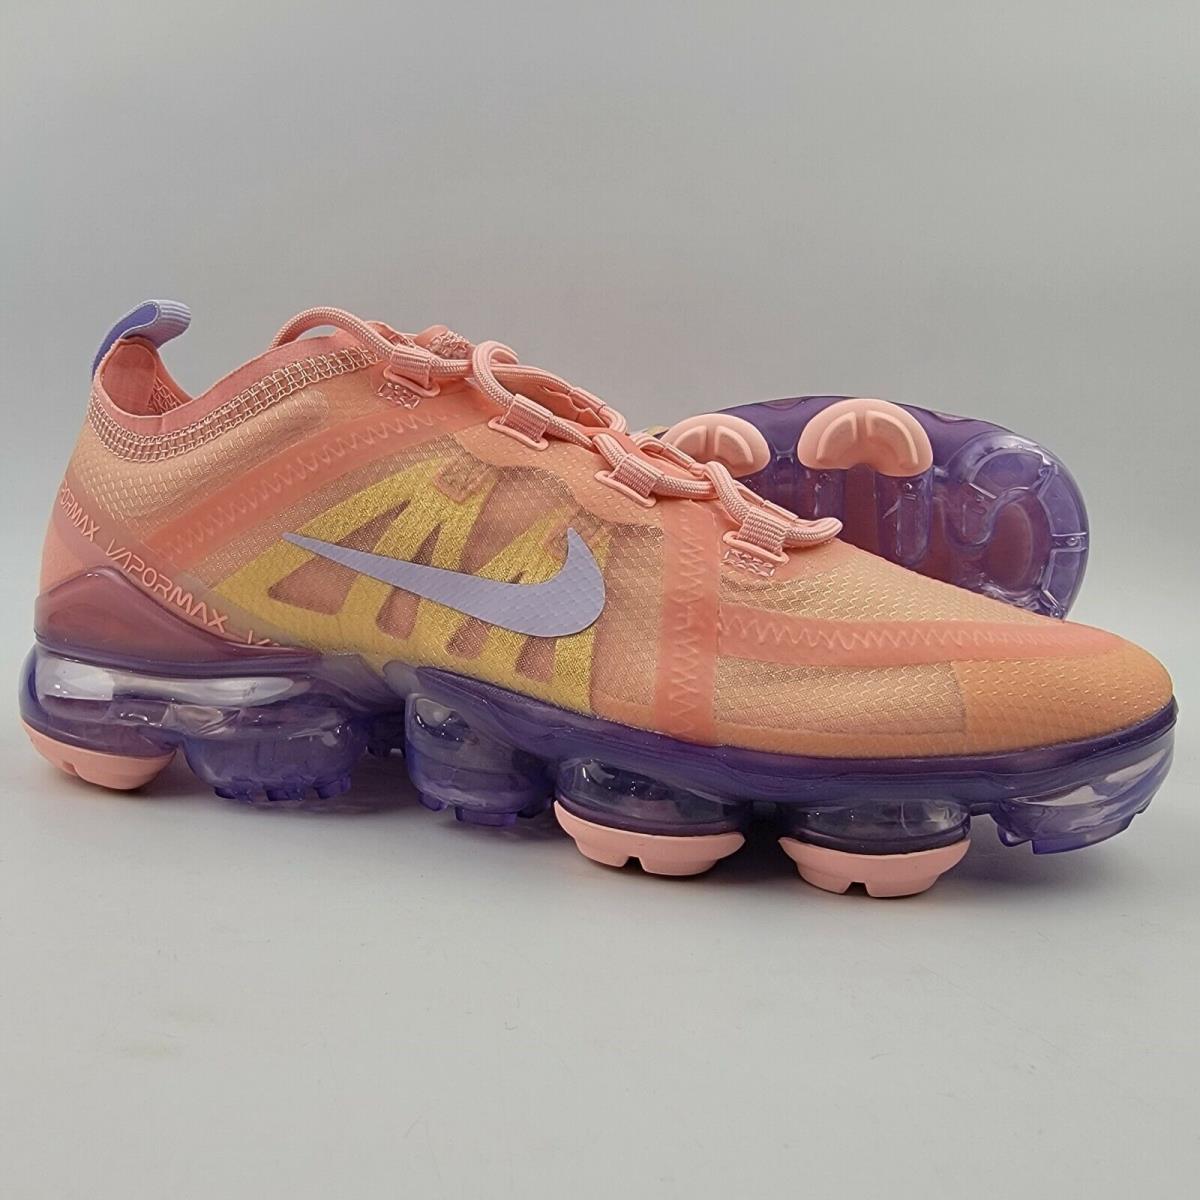 Nike Air Vapormax 2019 Running Shoes Bleached Coral Tint AR6632-603 Womens 7